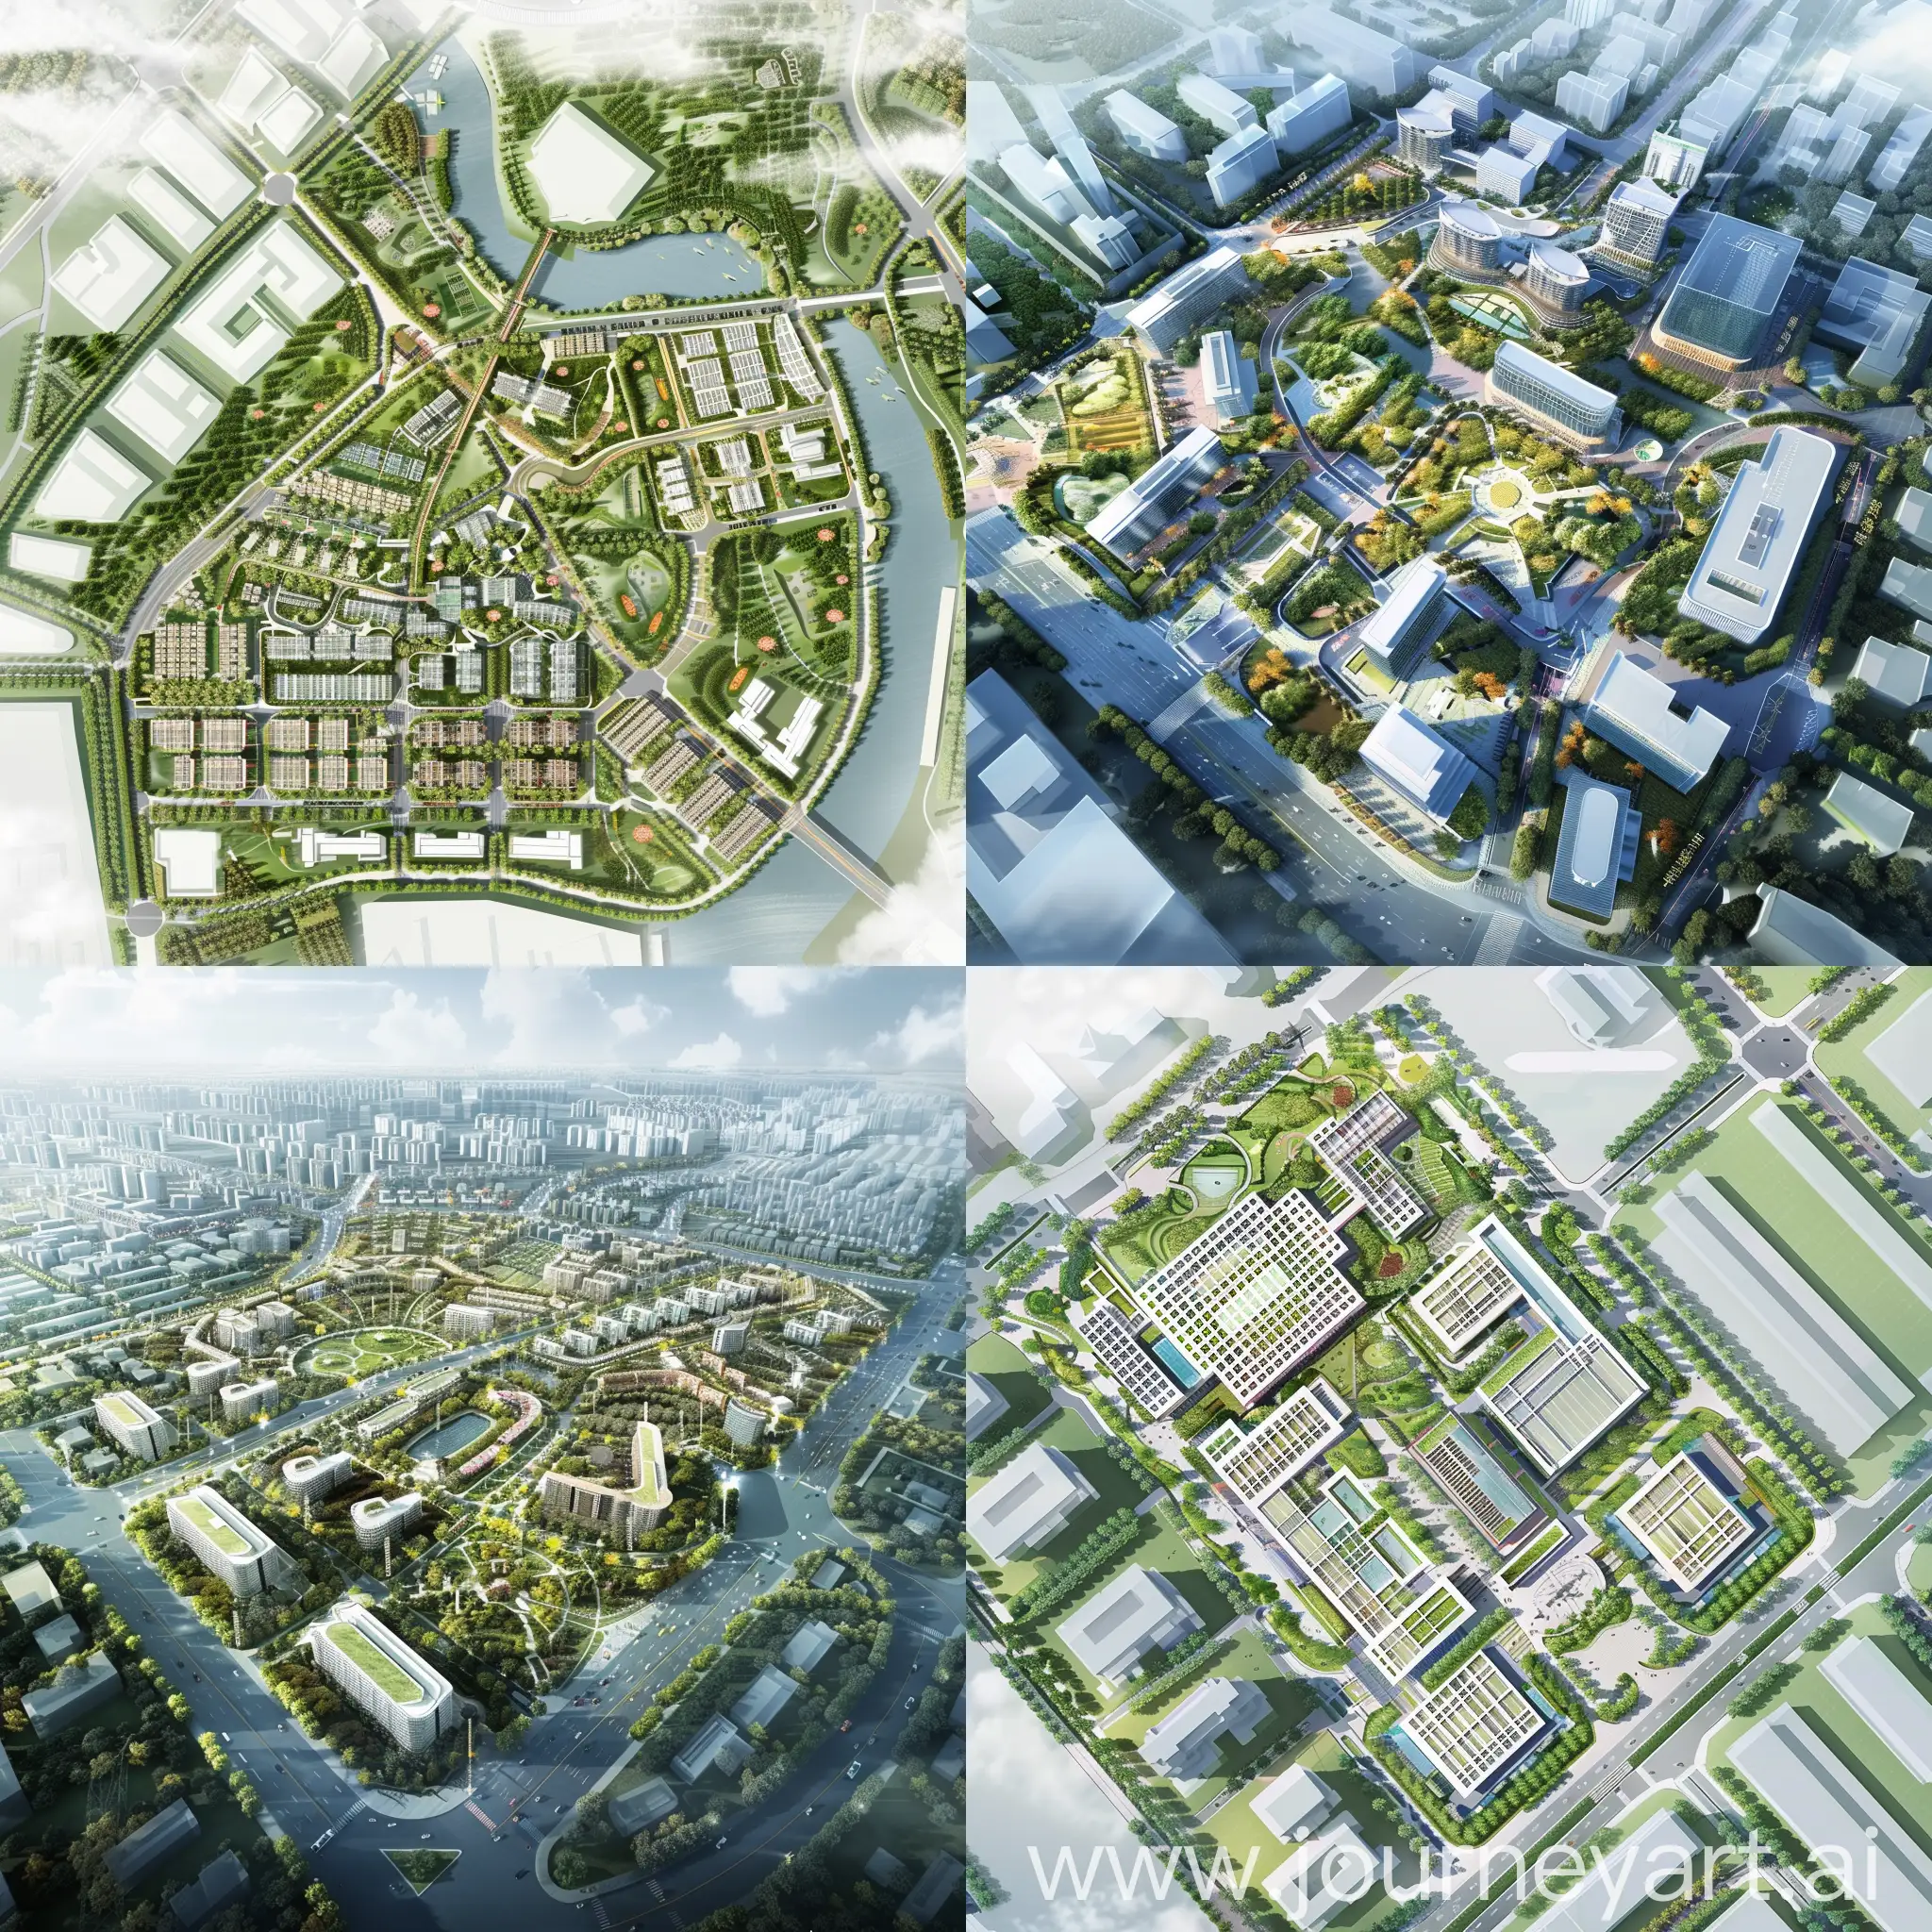 Taiyuan-Fengdong-Central-Business-District-Master-Plan-Blueprint